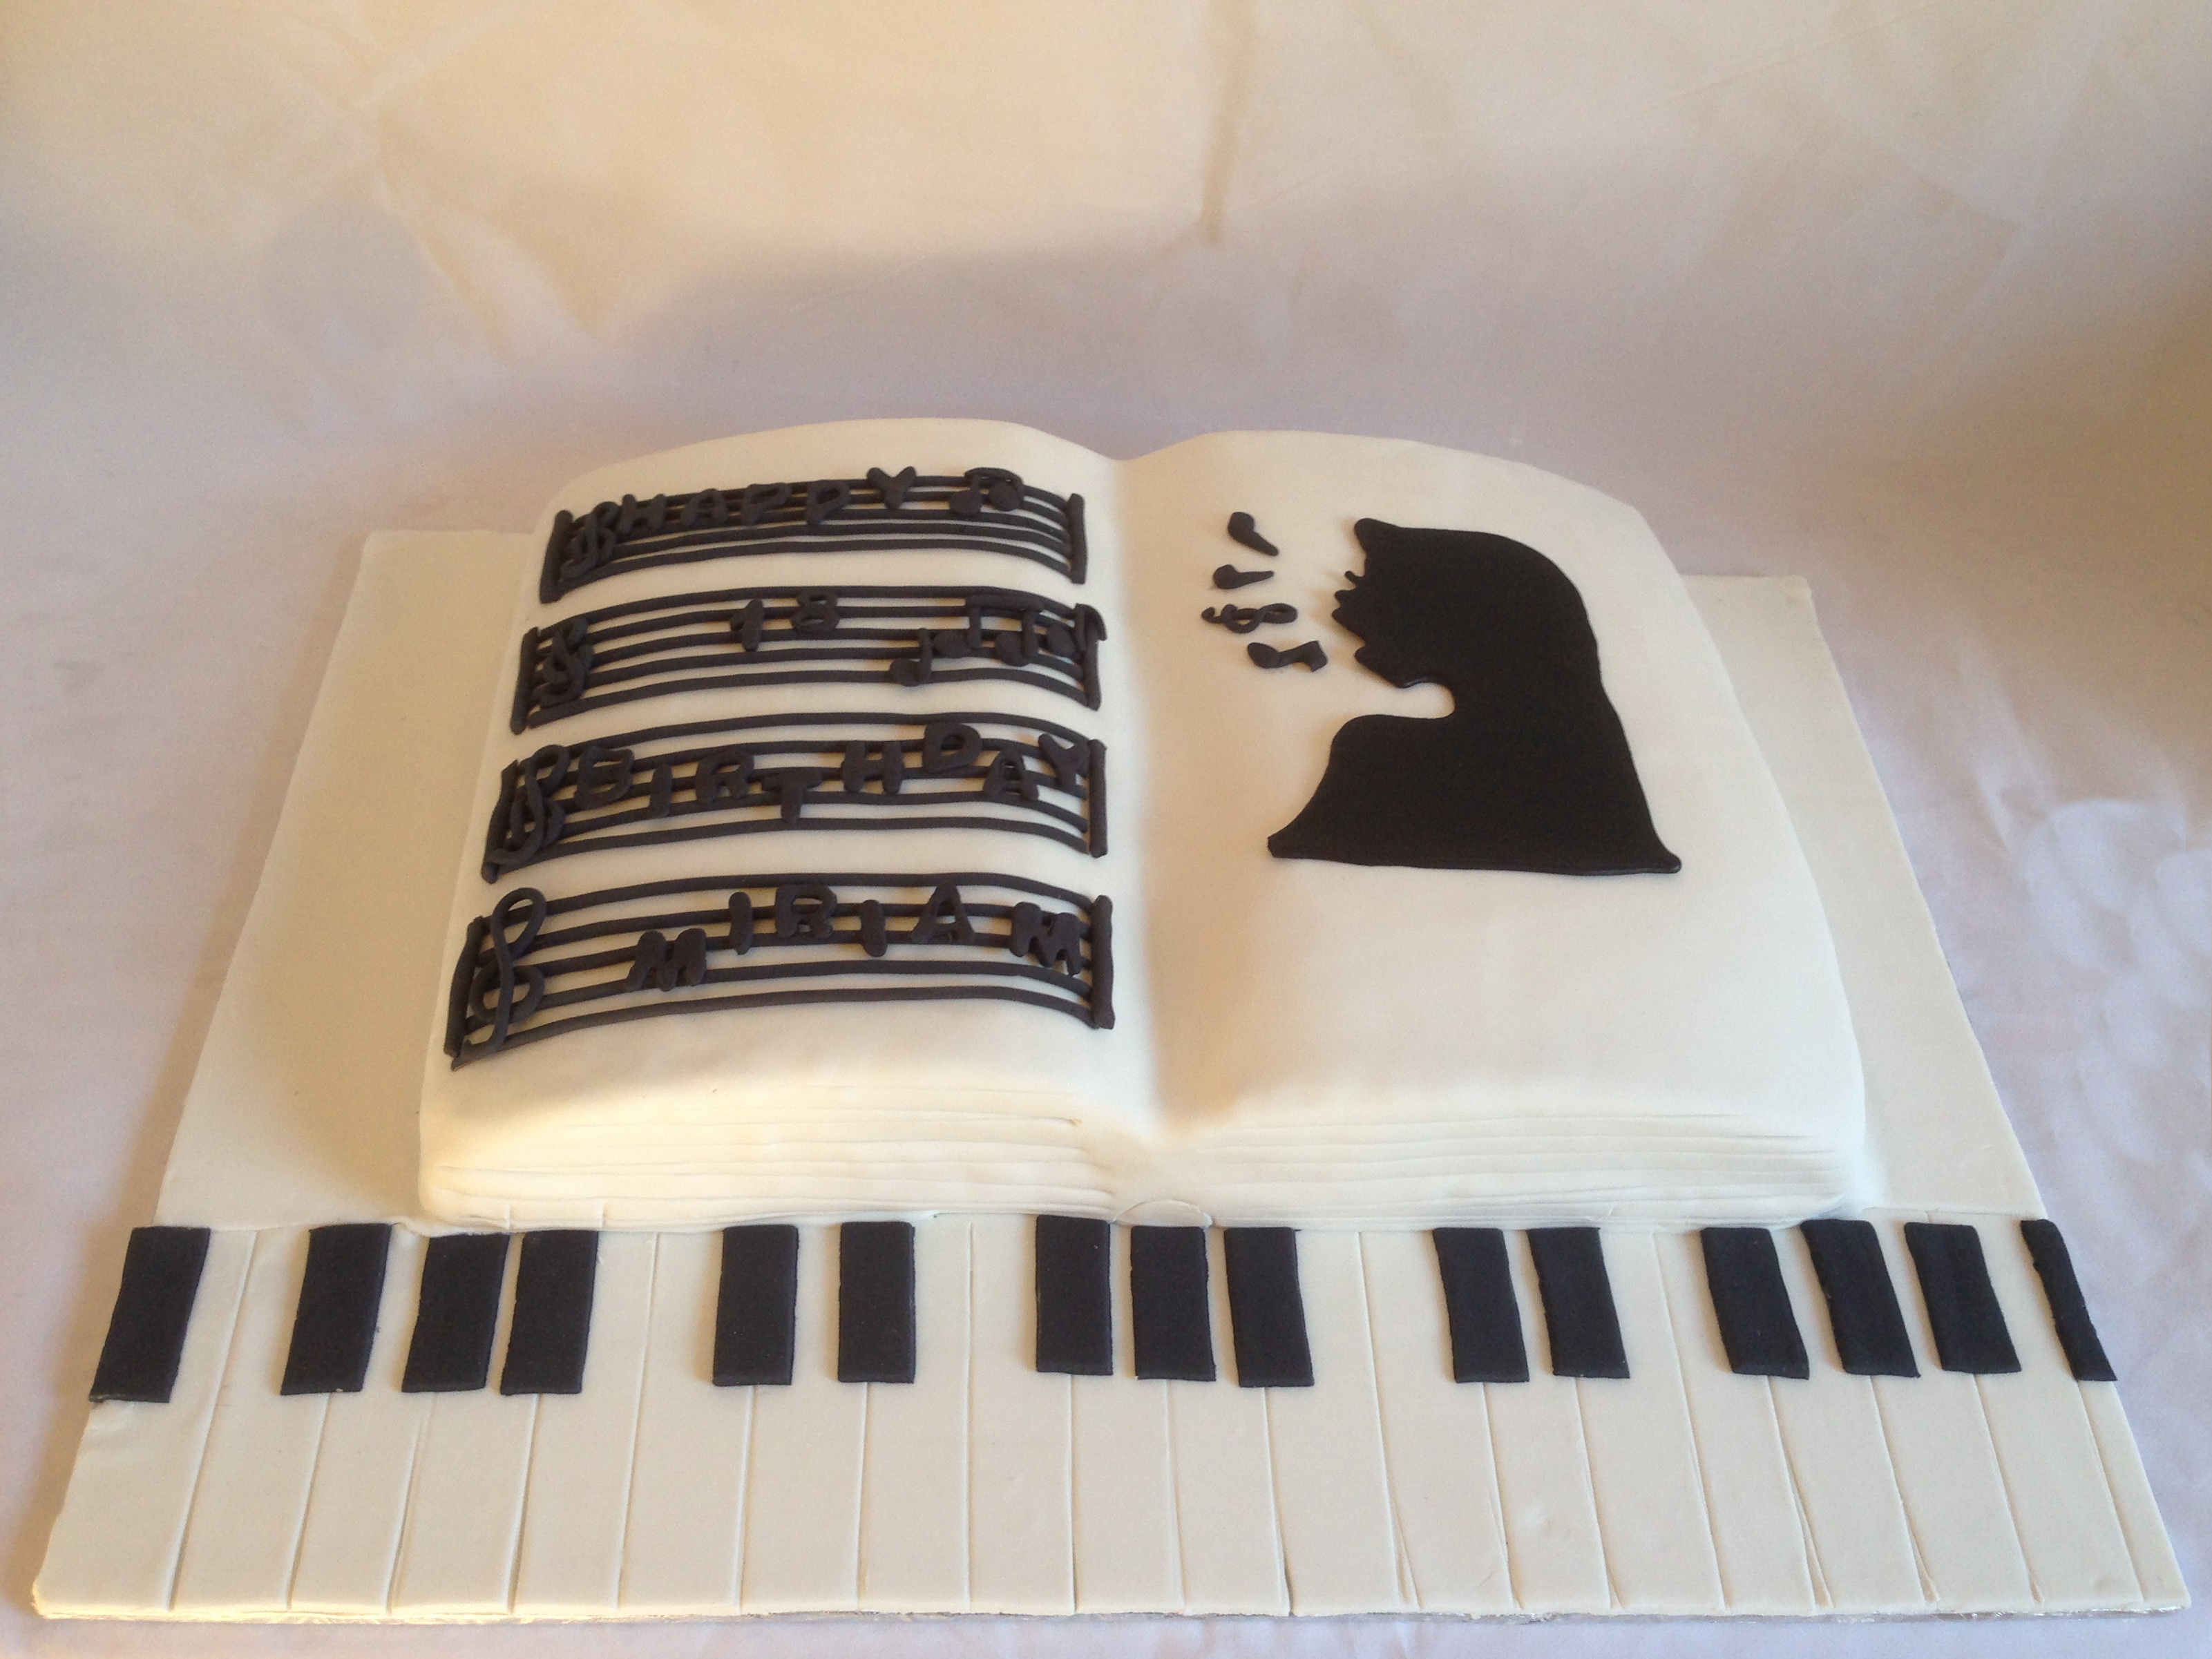 A music theory geek totally tore apart this Happy Birthday cake - Classic FM